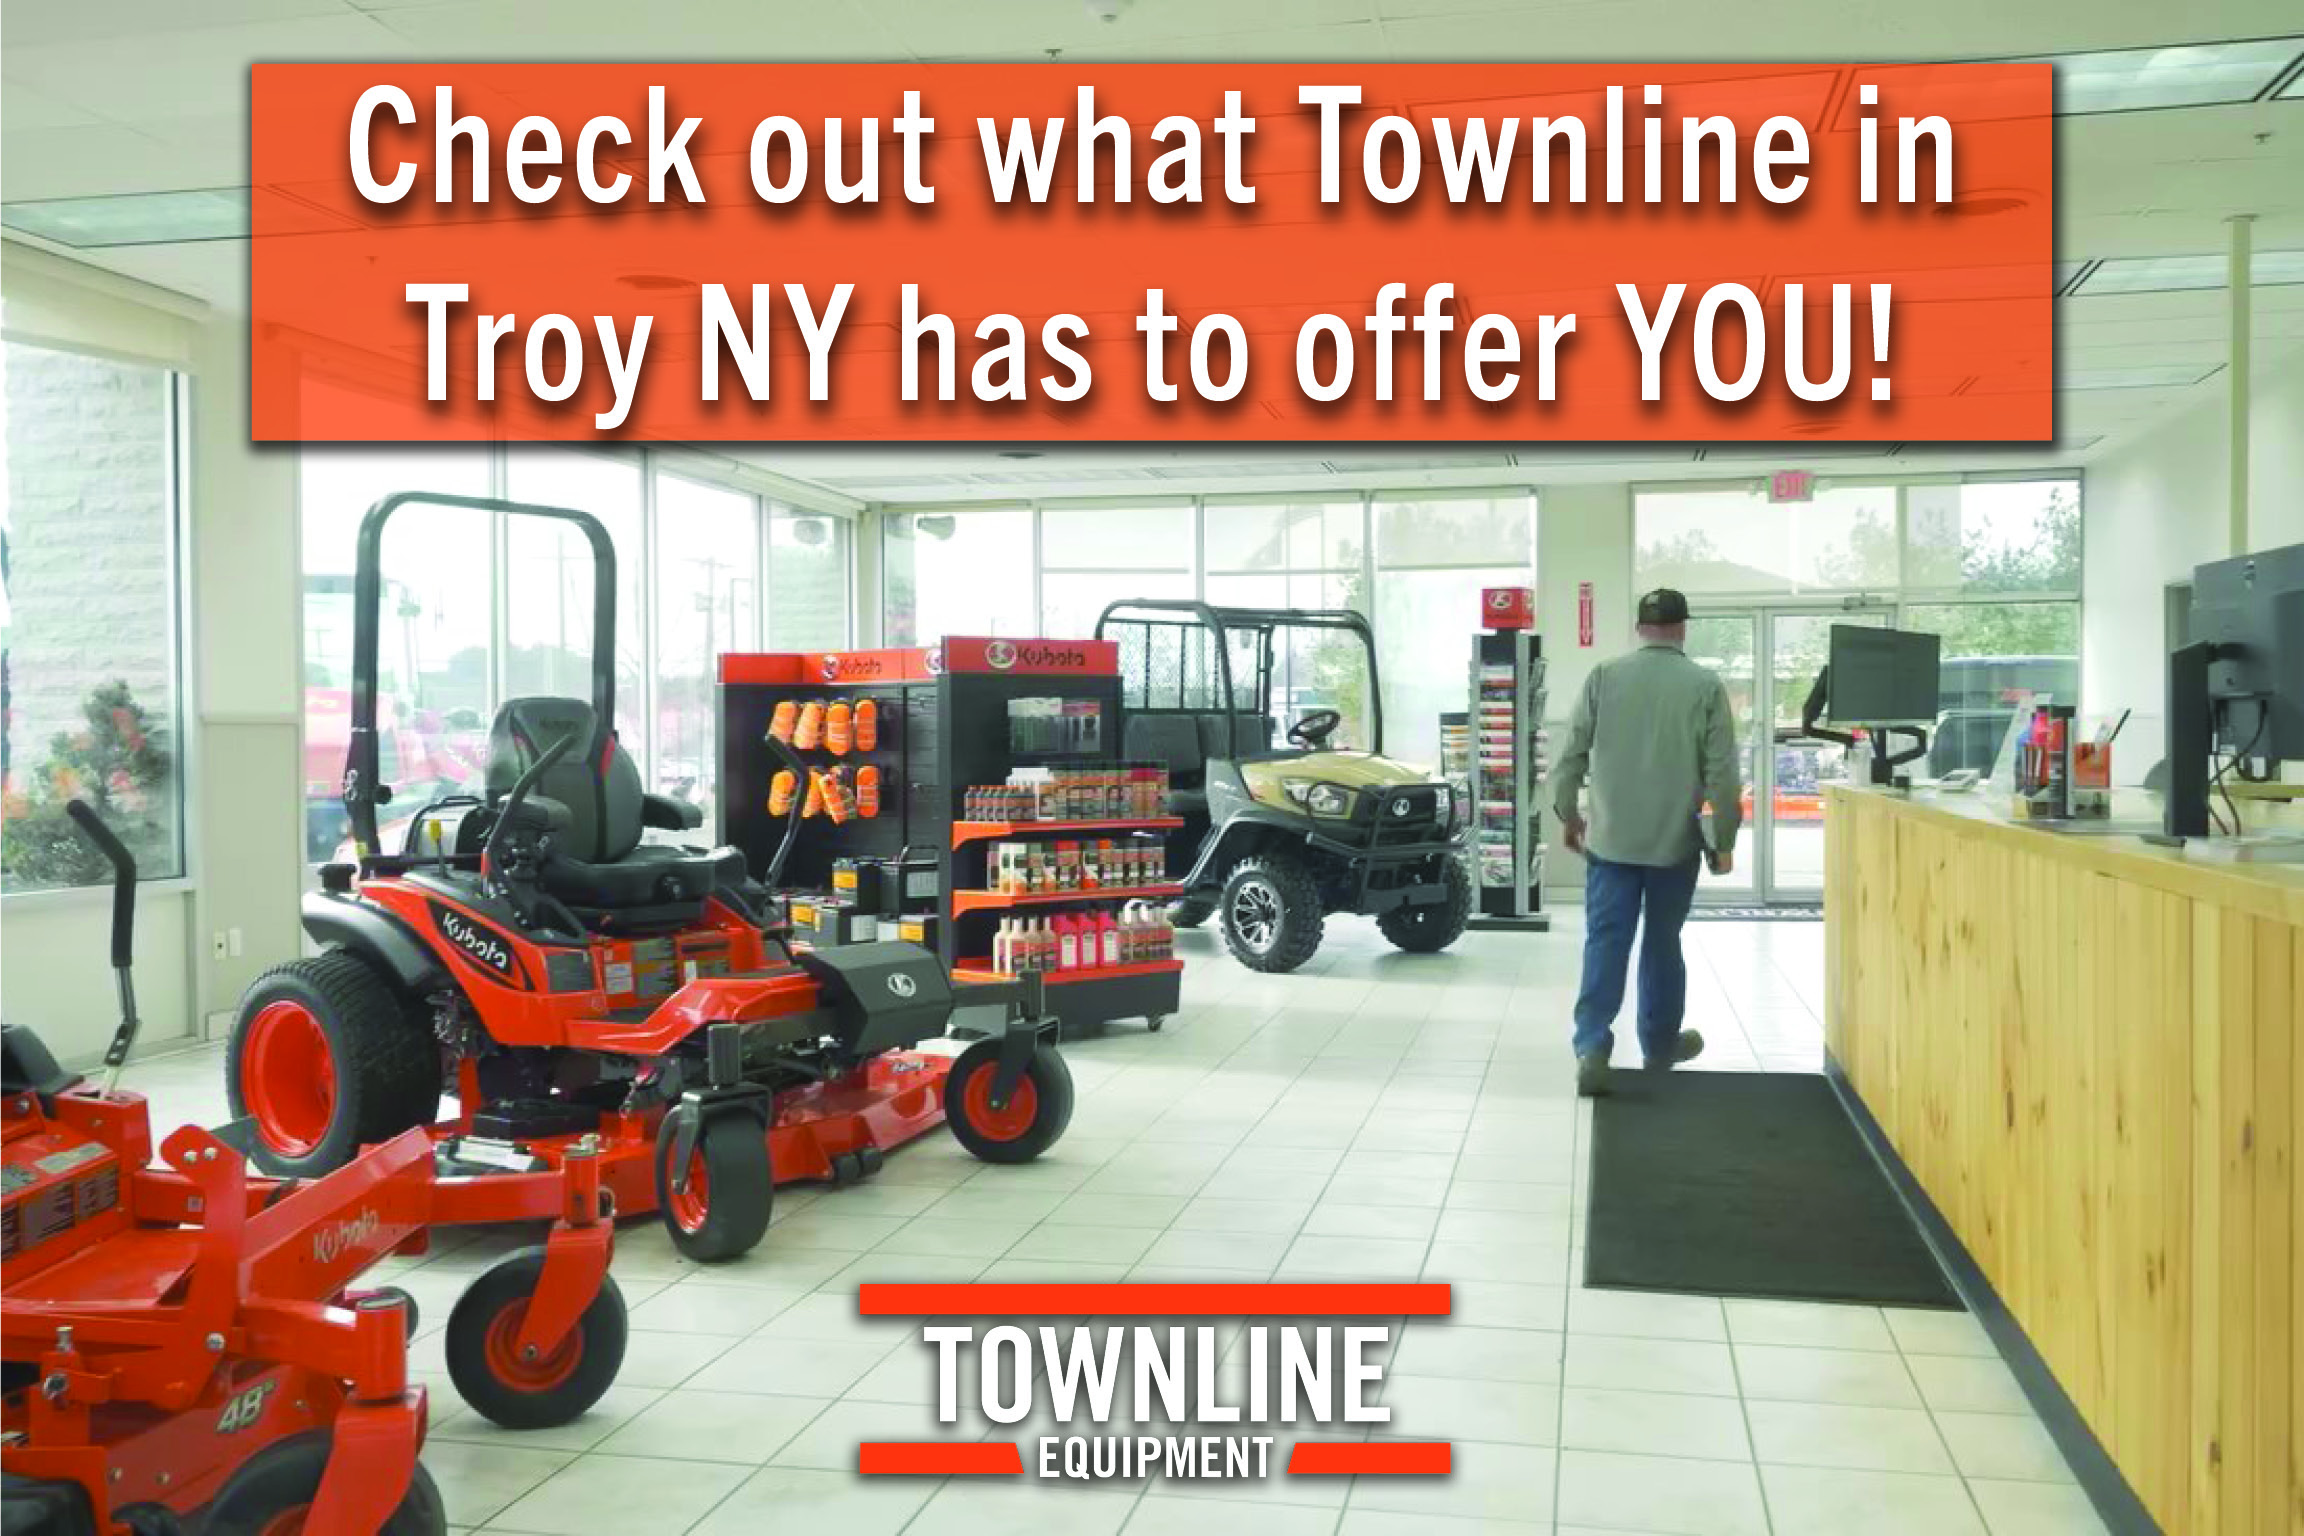 Check out Townline's Troy NY location & what it has to offer YOU!